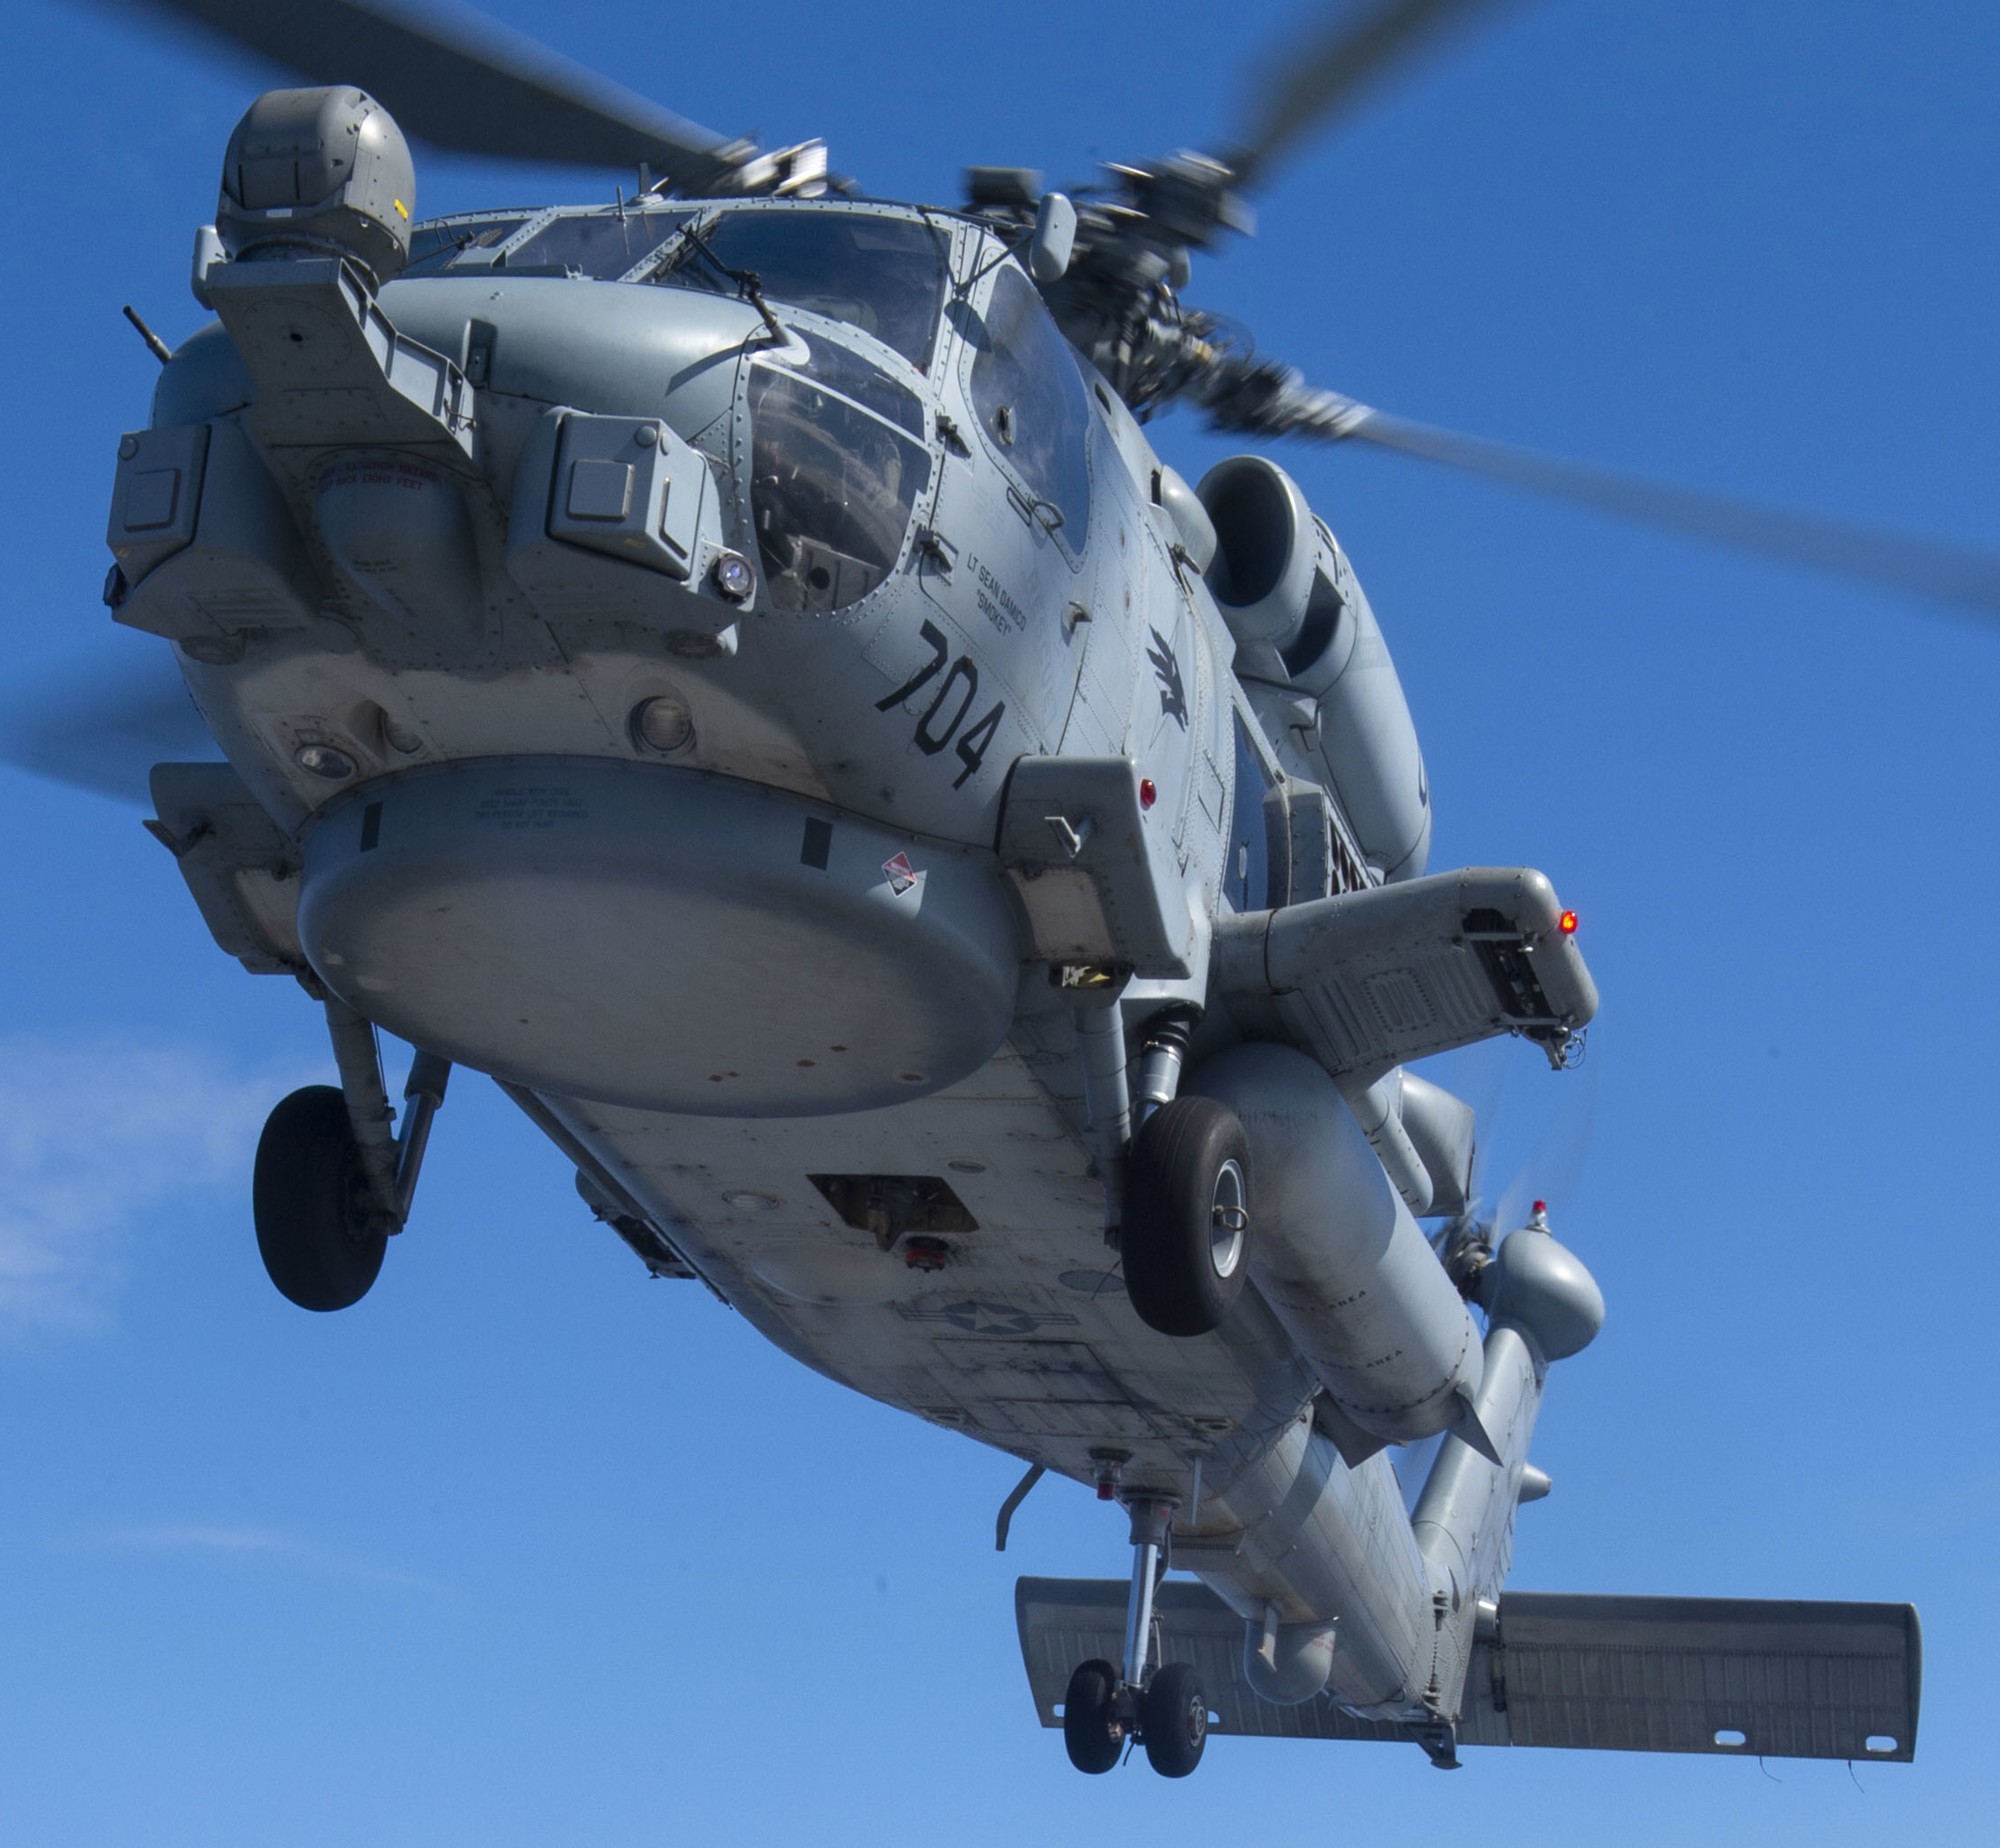 hsm-75 wolf pack helicopter maritime strike squadron mh-60r seahawk ddg-100 uss kidd 76